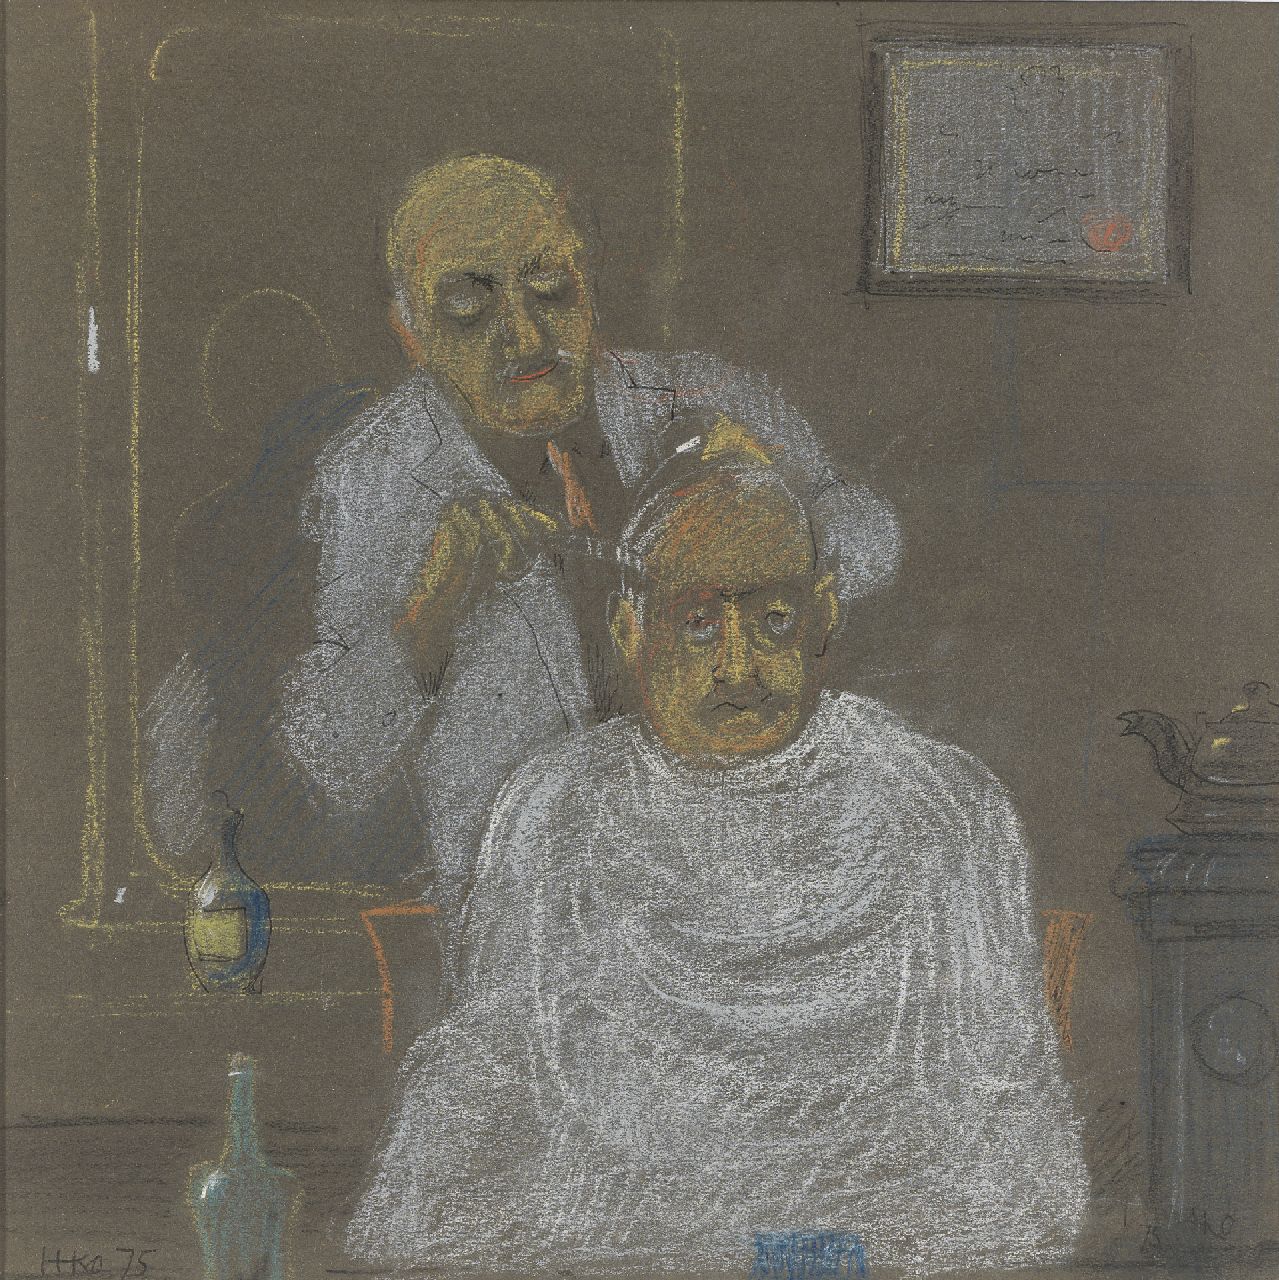 Kamerlingh Onnes H.H.  | 'Harm' Henrick Kamerlingh Onnes, At the hairdresser's, pastel and ballpoint on paper 25.5 x 25.5 cm, signed l.l. and l.r. with monogram and dated '75